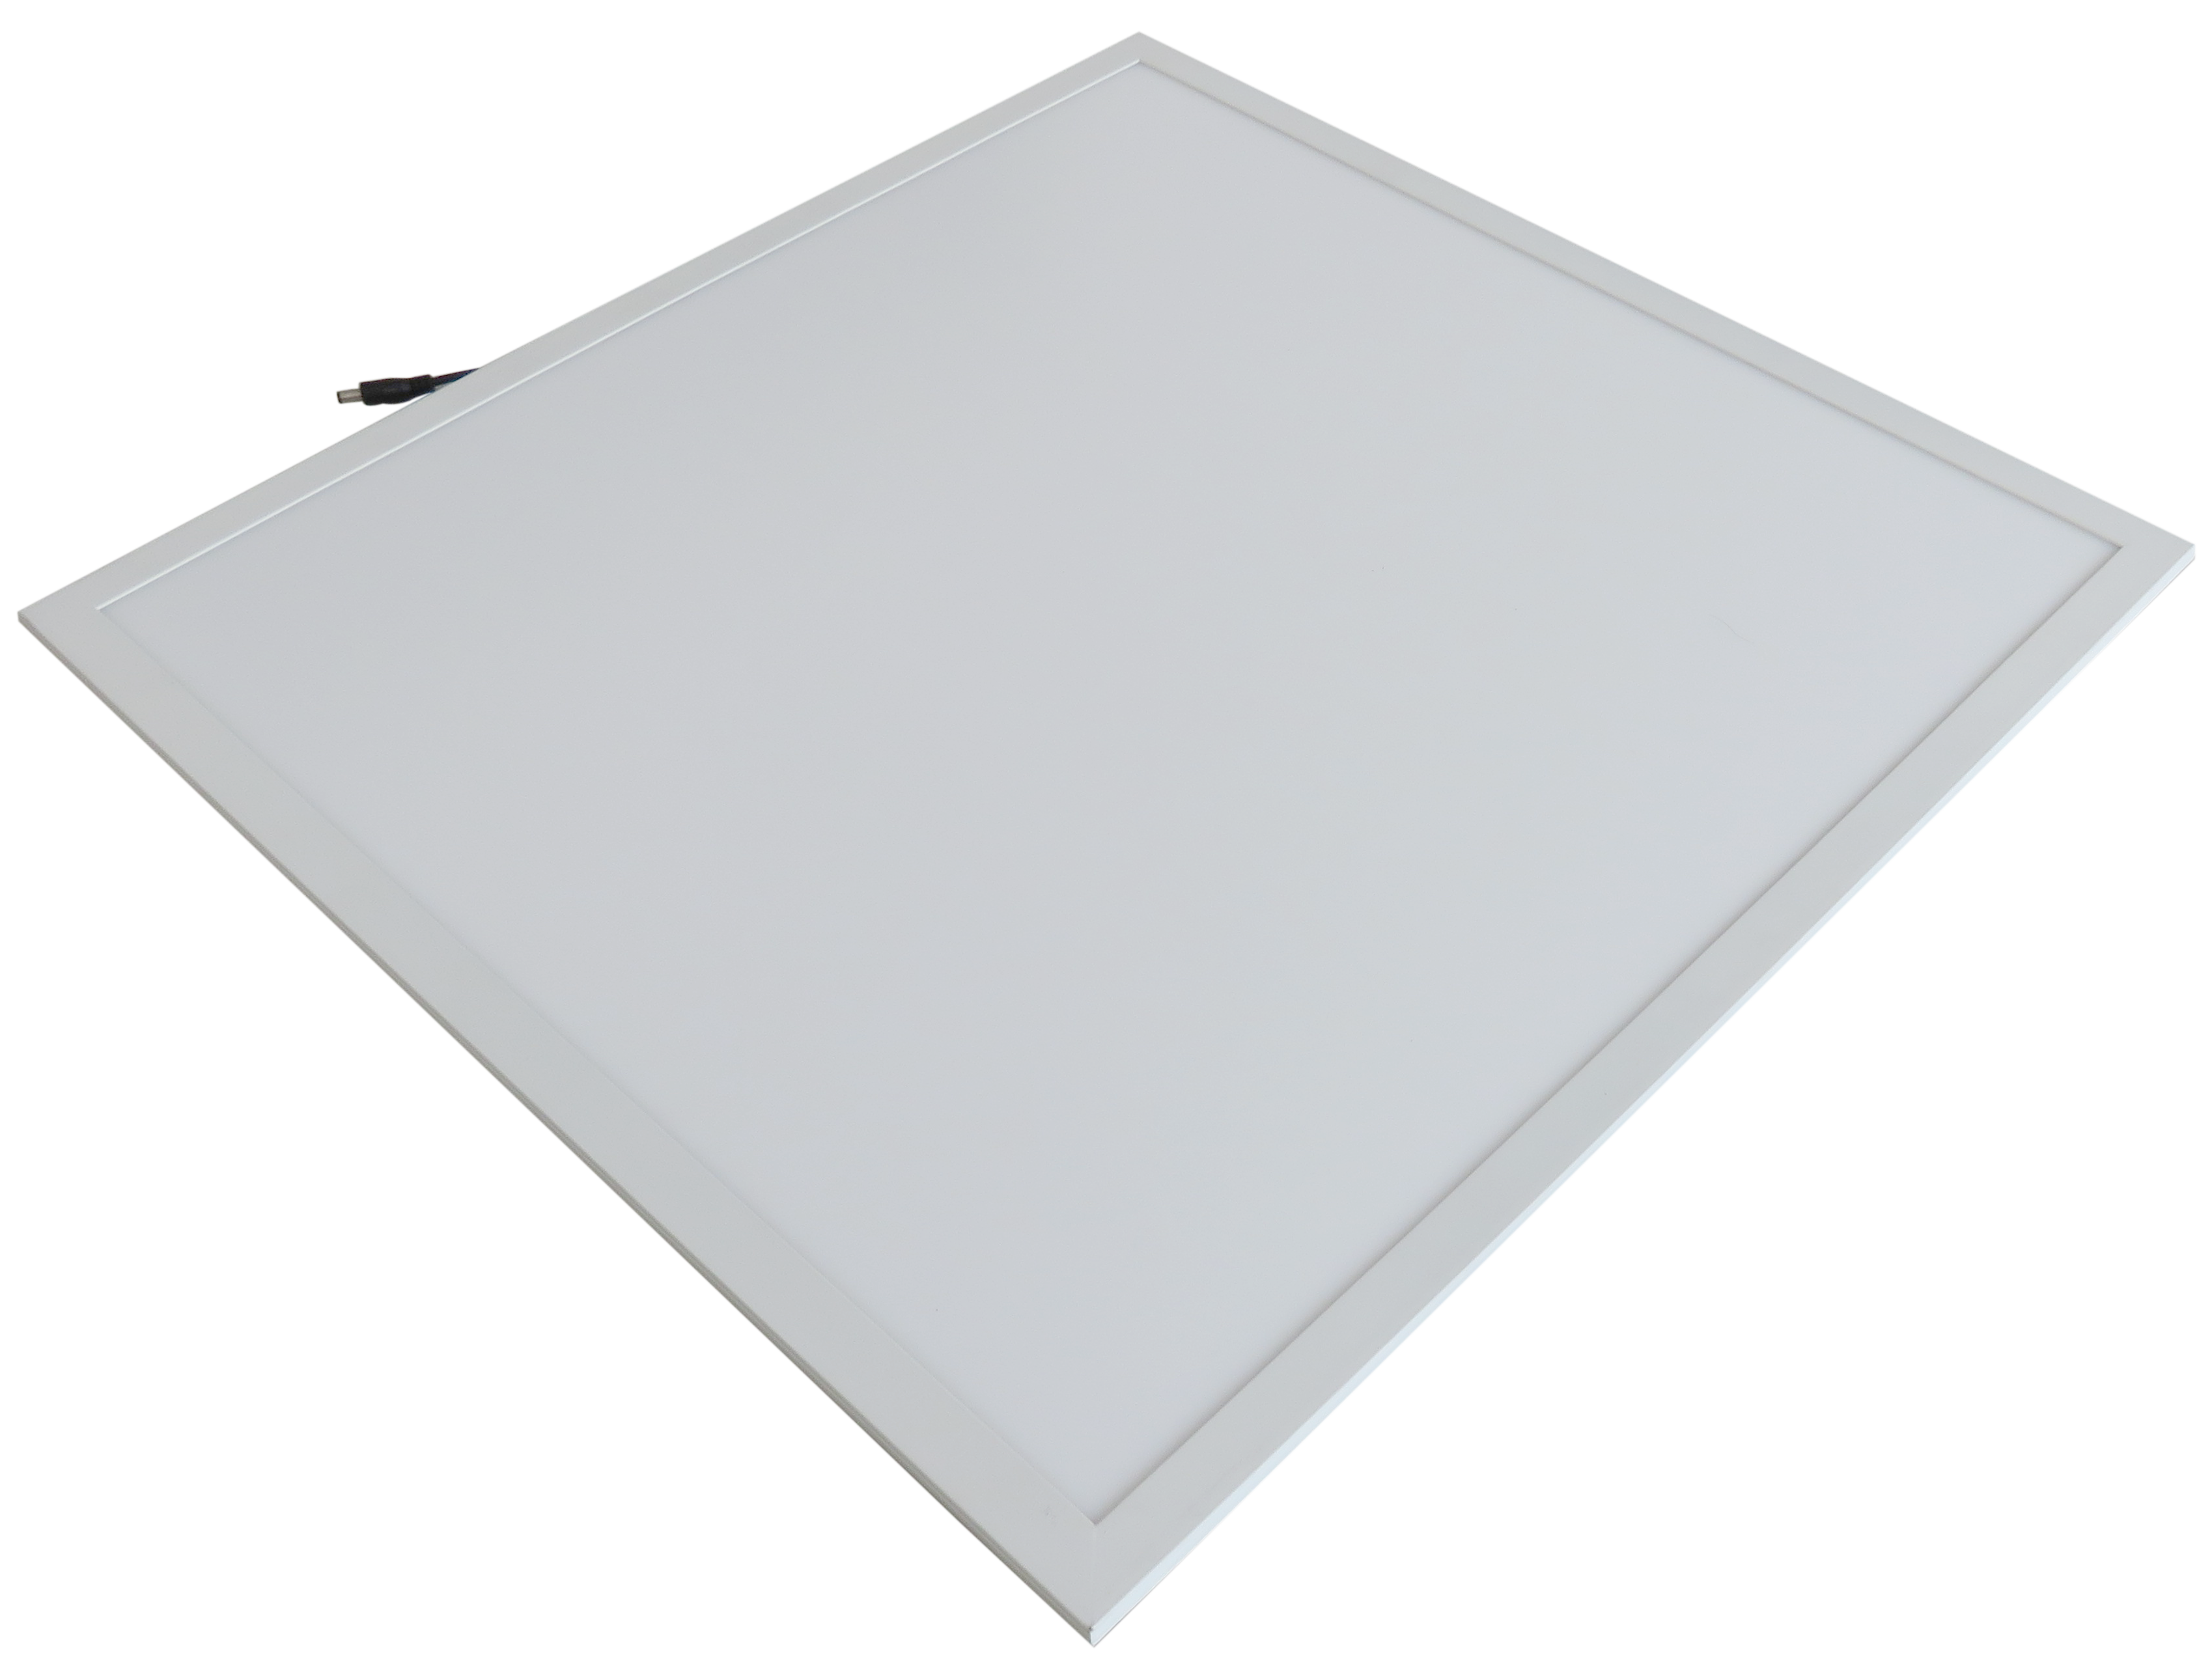 Corp SLIM PANEL LED 40W 60x60 3200lm NW 